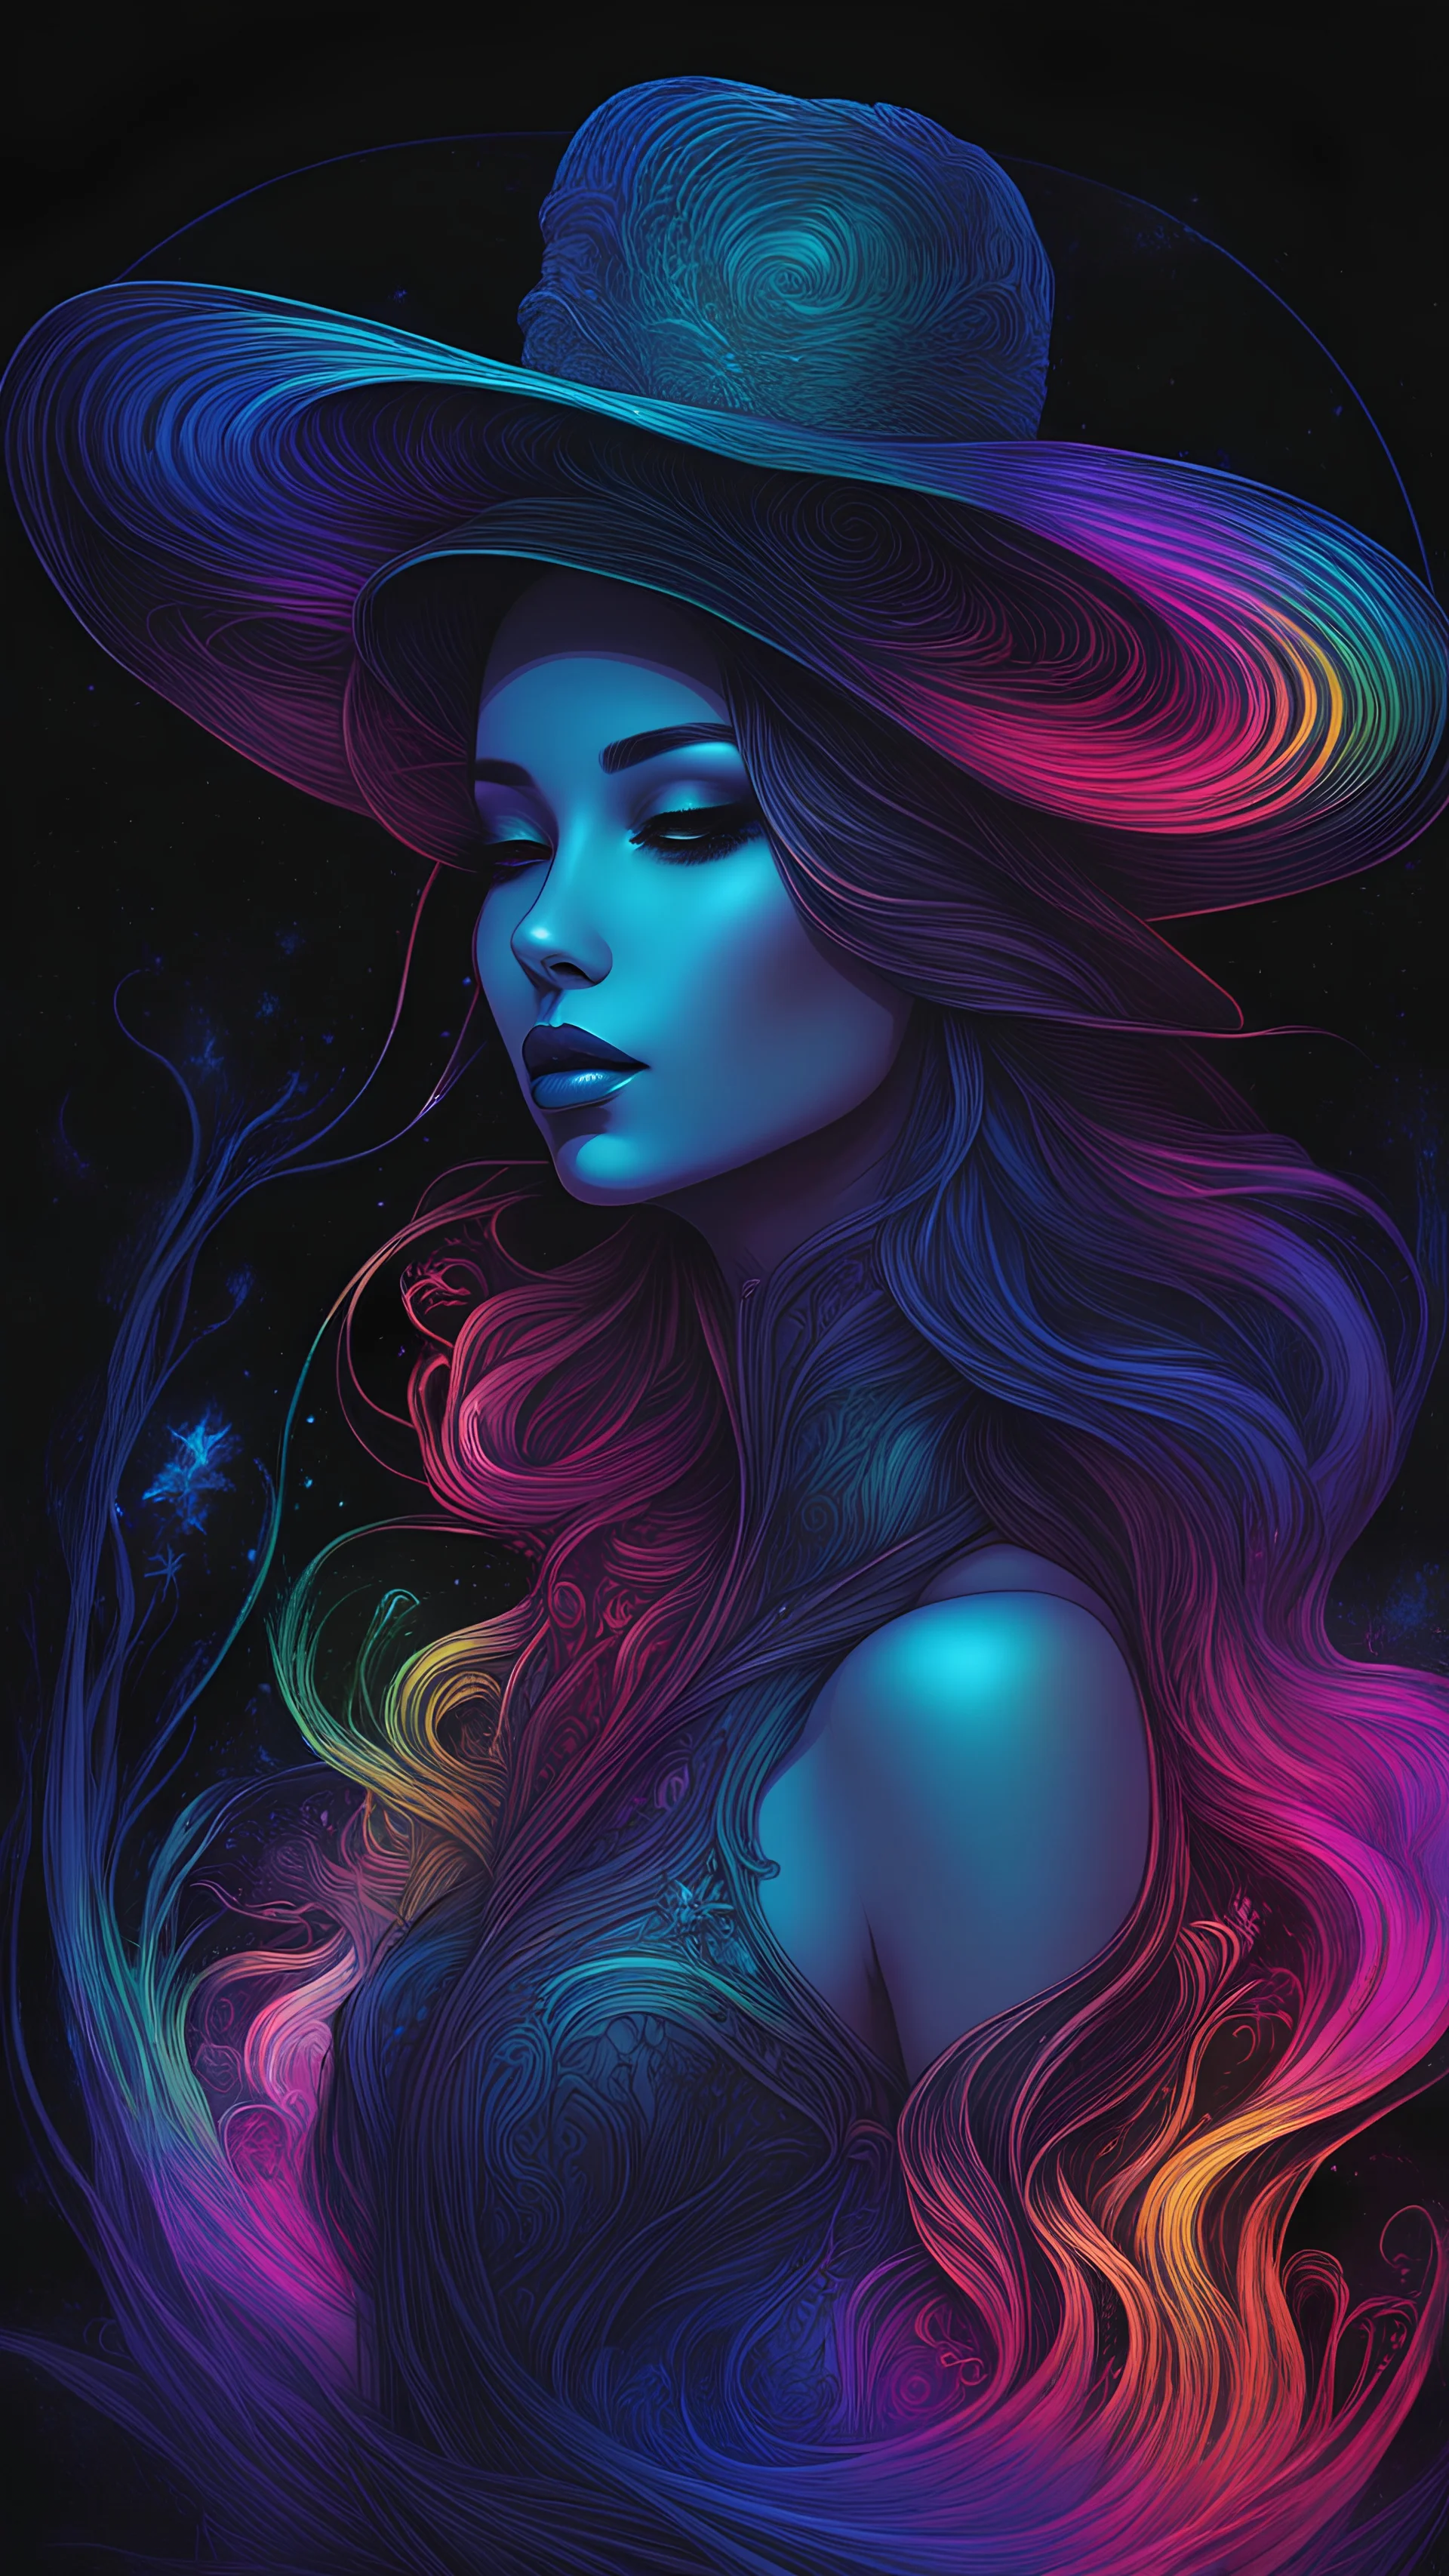 A mesmerizing dark fantasy illustration featuring a sensuous, ethereal female figure adorned with a striking, oversized hat in a minimalist, line art style. The female figure, with her body portrayed in vivid rainbow colors, is intricately posed against the depths of an inky darkness. At the heart of the image lies a symbiotic entity – a horse composed entirely of shiny, vibrant glass. This glass horse radiates rainbow colors, harmoniously merging with the female figure. The illustration exudes